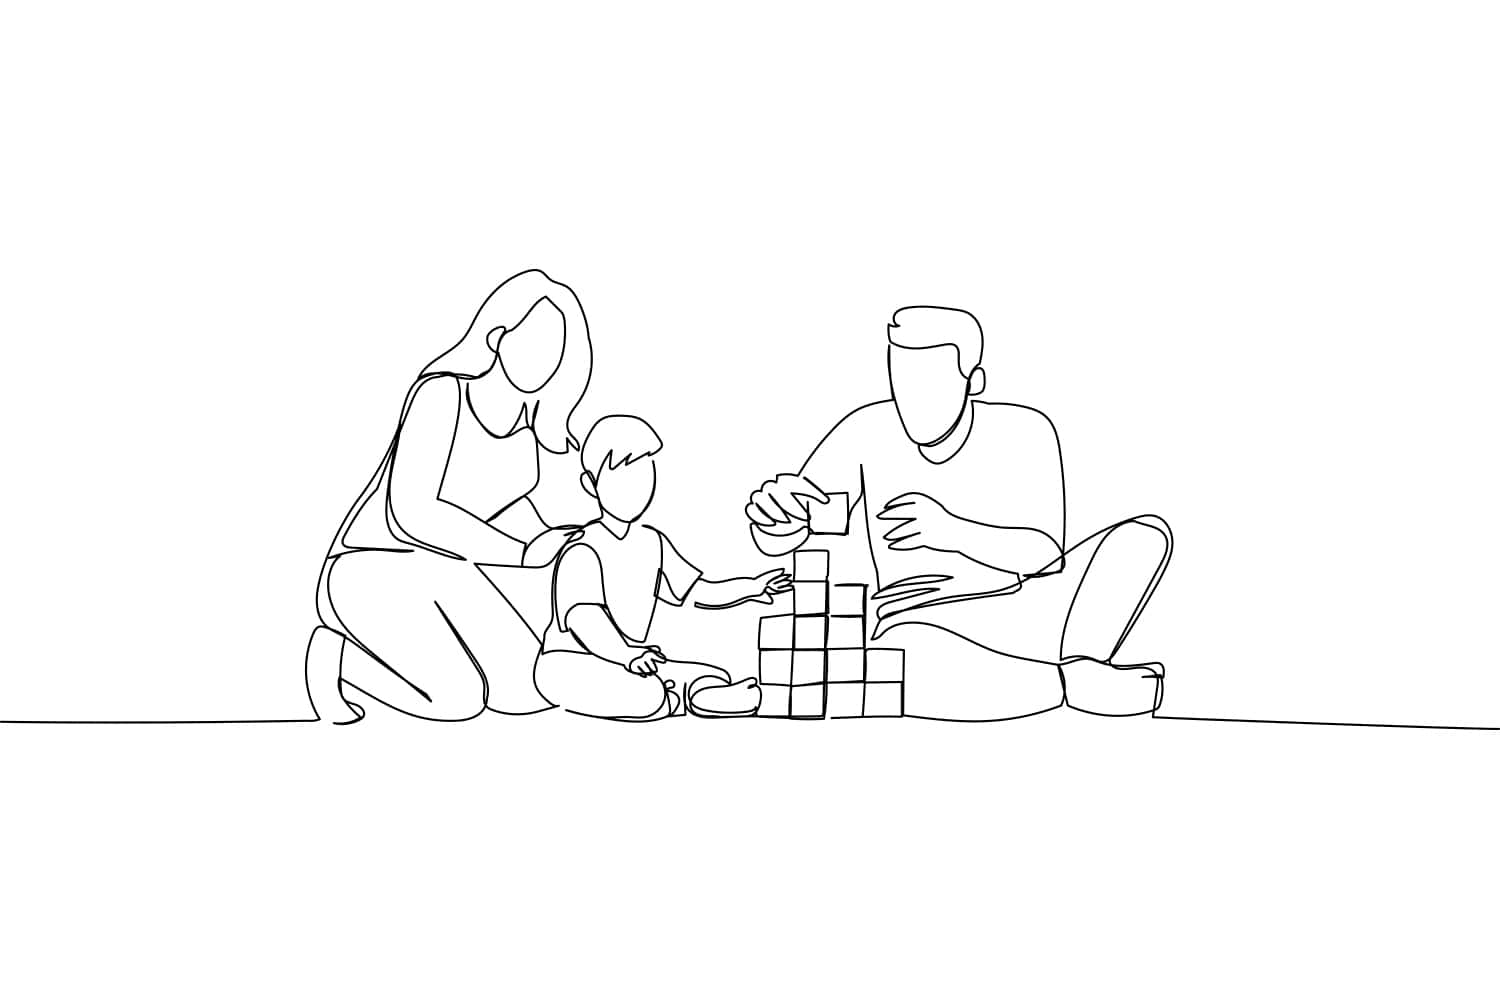 A line drawing of two parents helping a child play with building blocks